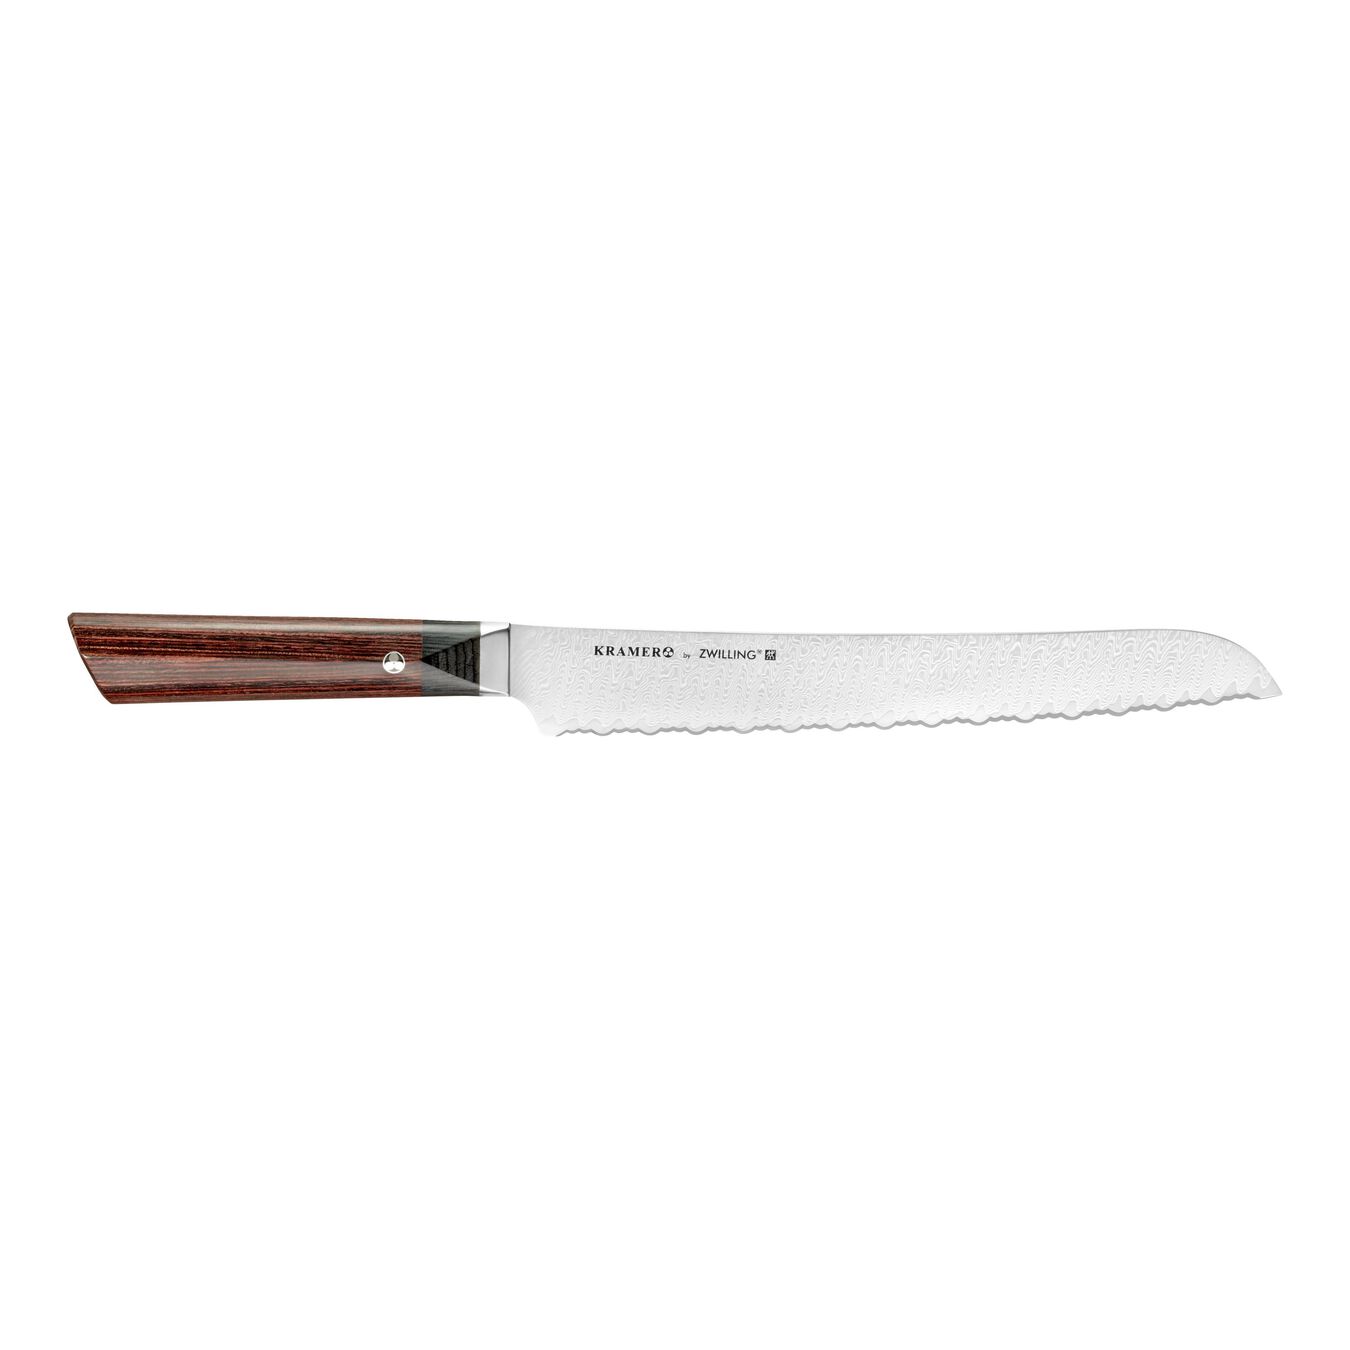 10-inch, Bread Knife,,large 1